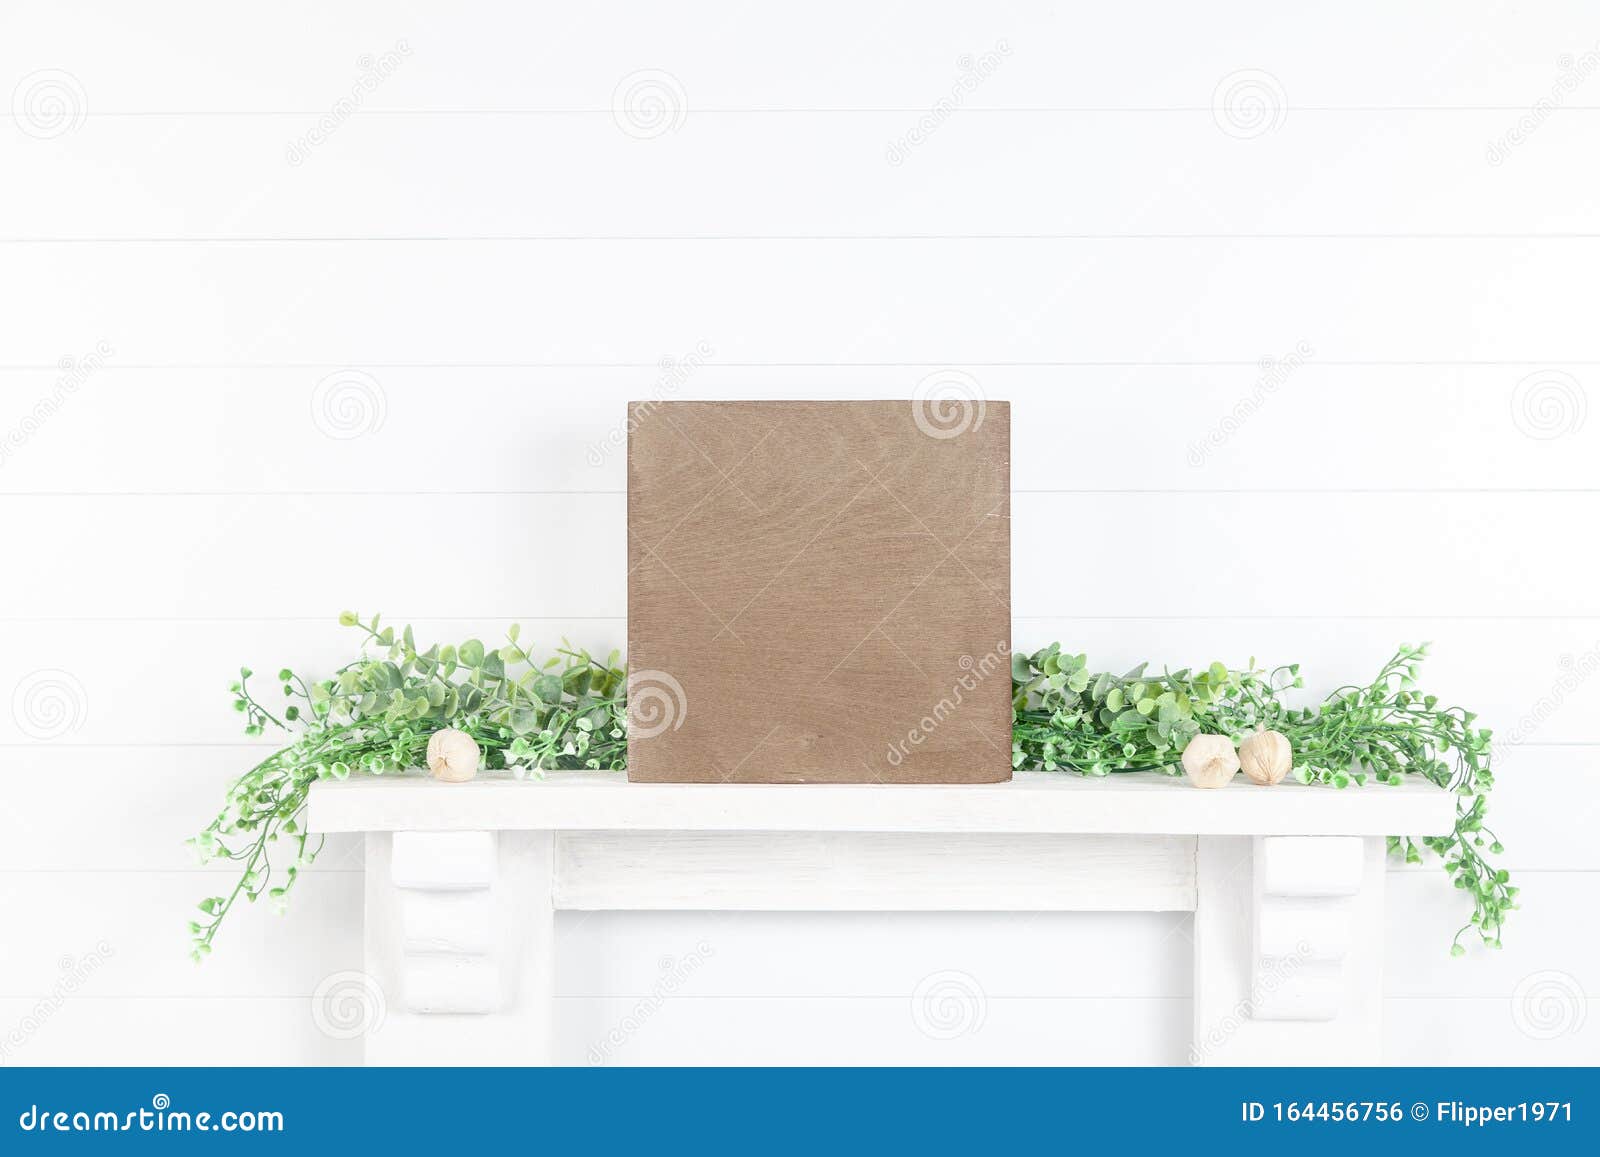 Wood 12x36 Sign Mock Up Wood Frame Mock Up Styled Product Stock Photography Wood Sign Flat Lay Farmhouse Spring Mock Up